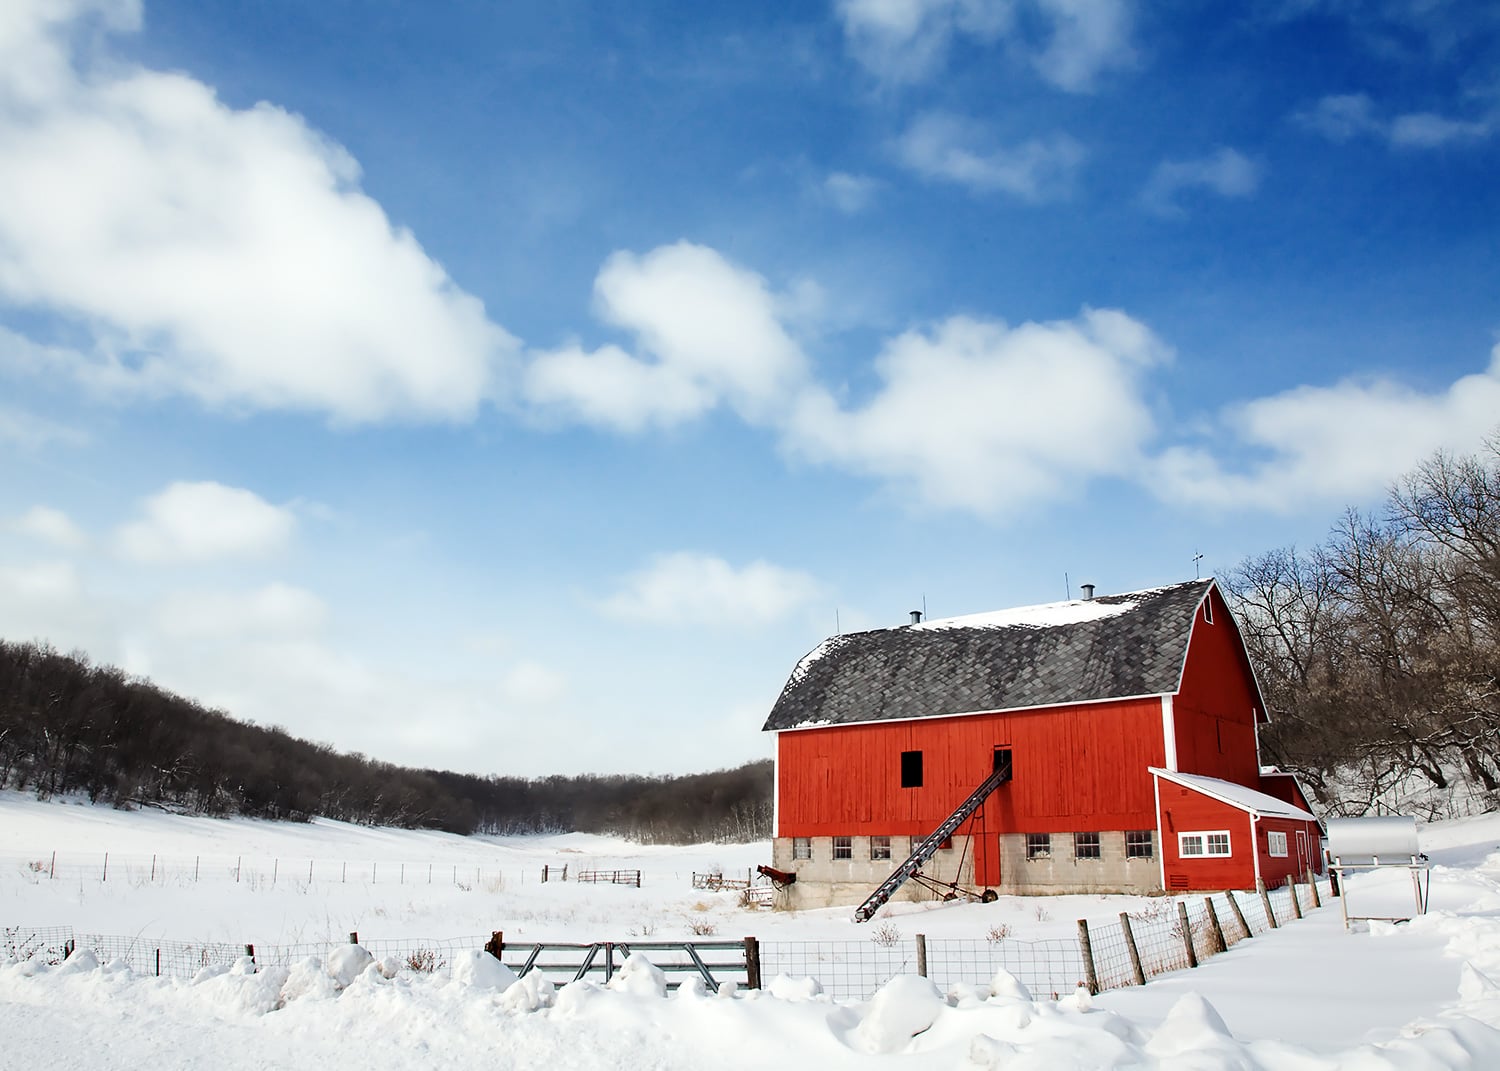 Freshly fallen snow clings to a little red barn just outside of Mount Horeb, Wisconsin.&nbsp;→ Buy a Print